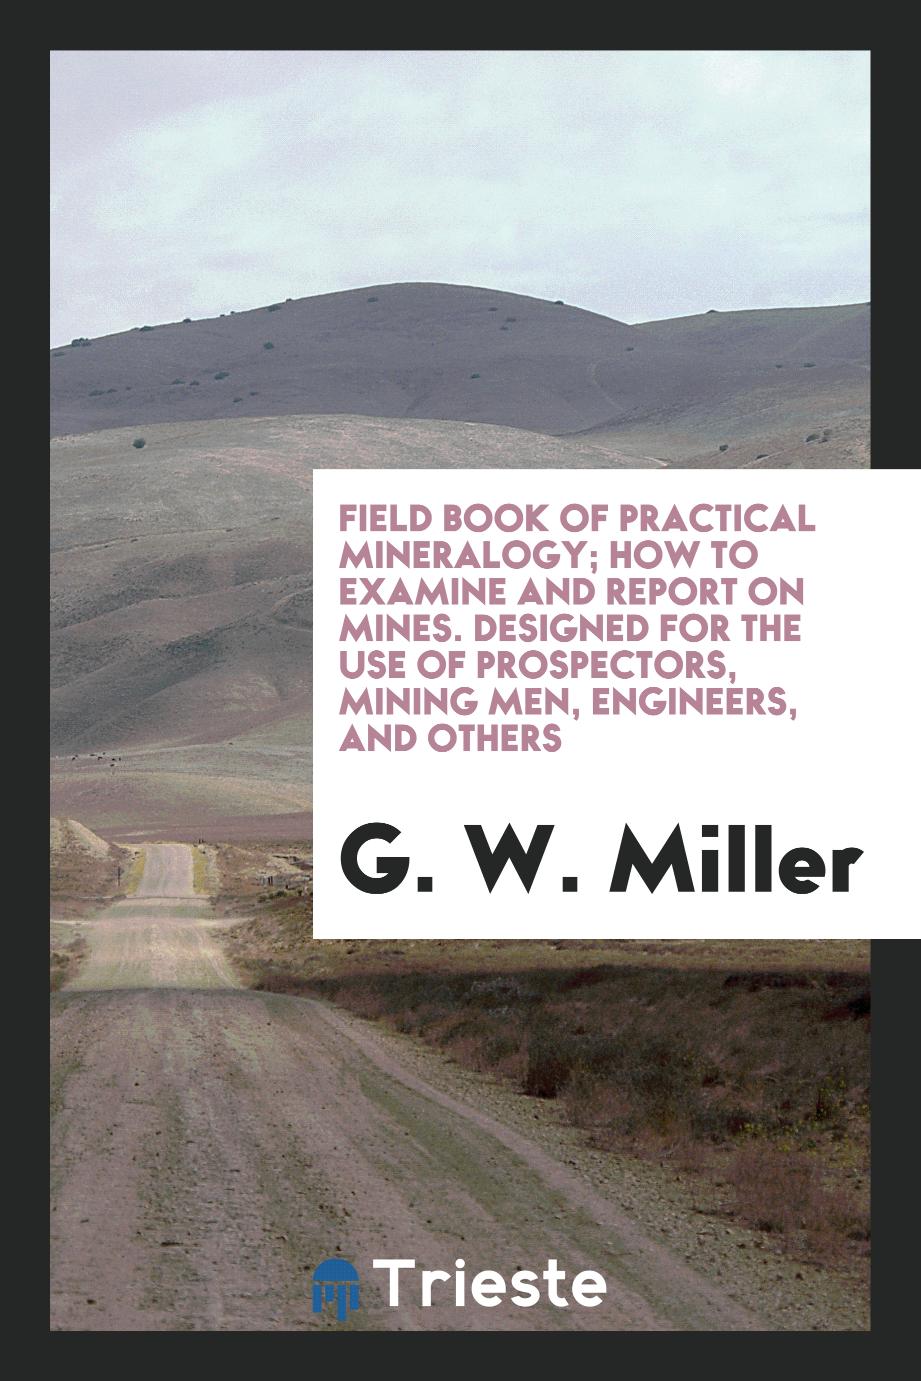 Field book of Practical Mineralogy; how to examine and report on mines. Designed for the use of prospectors, mining men, engineers, and others